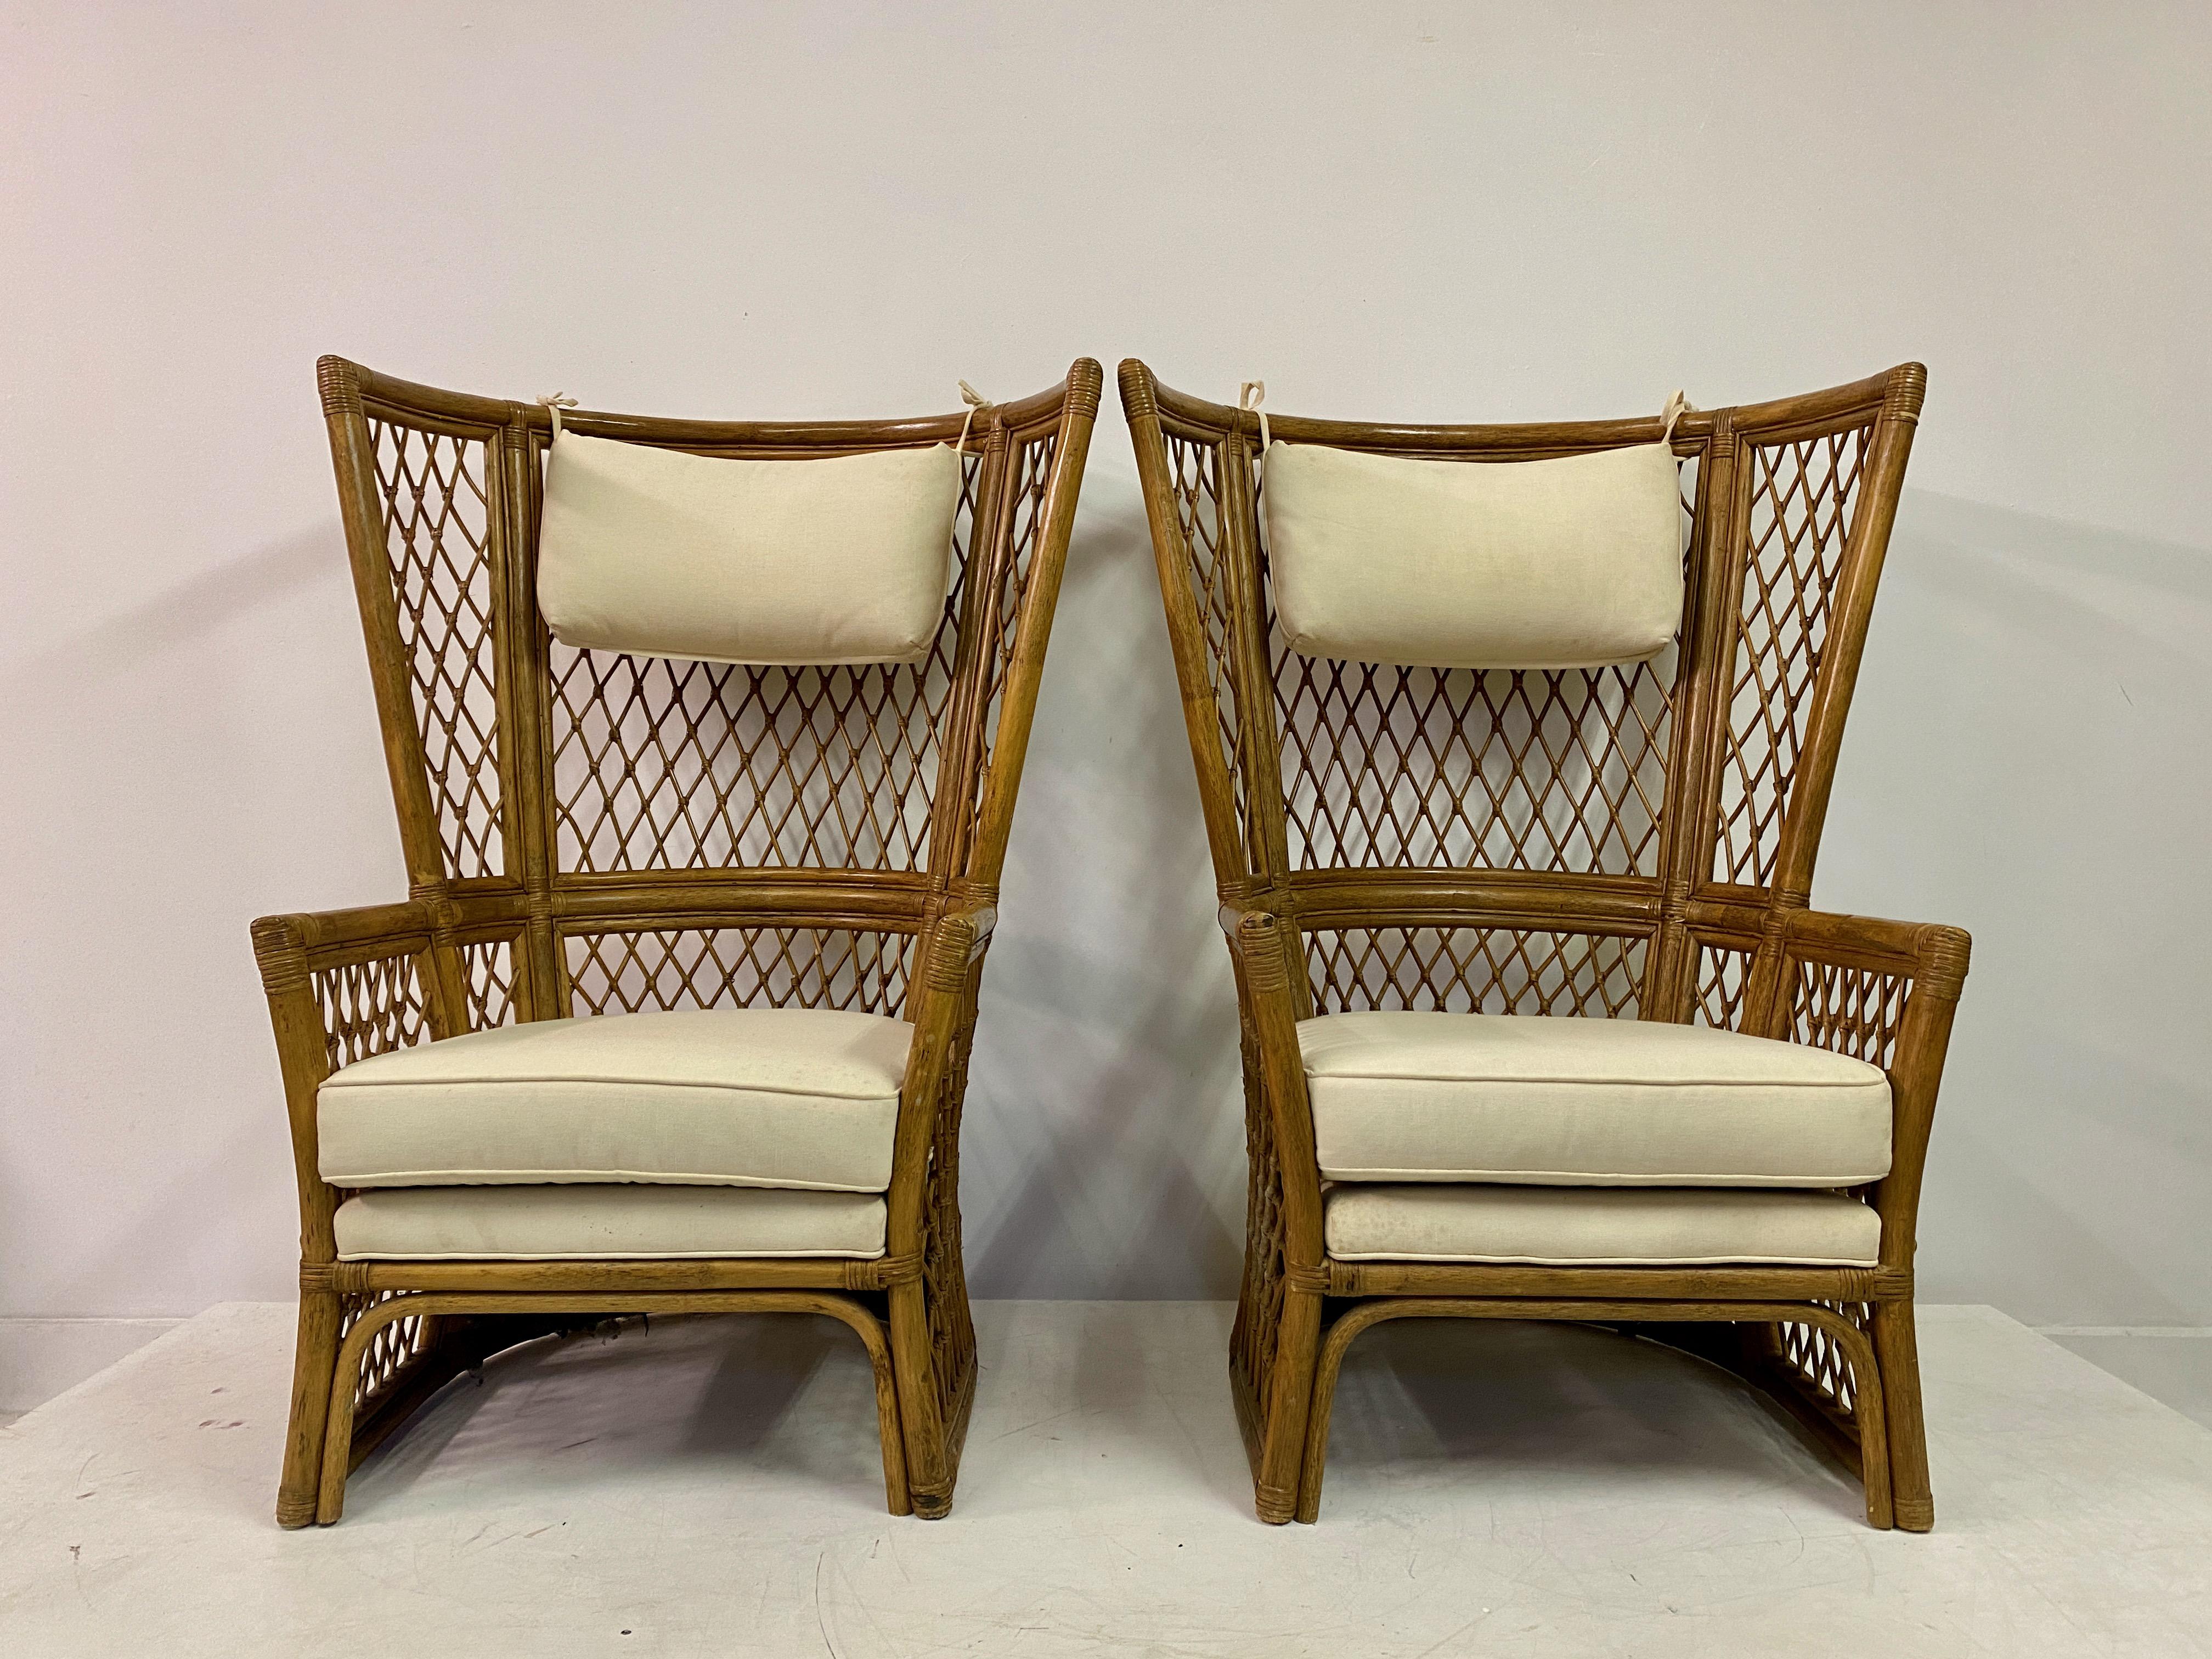 20th Century Pair Of 1980S High Back Bamboo Chairs With Ottomans For Sale